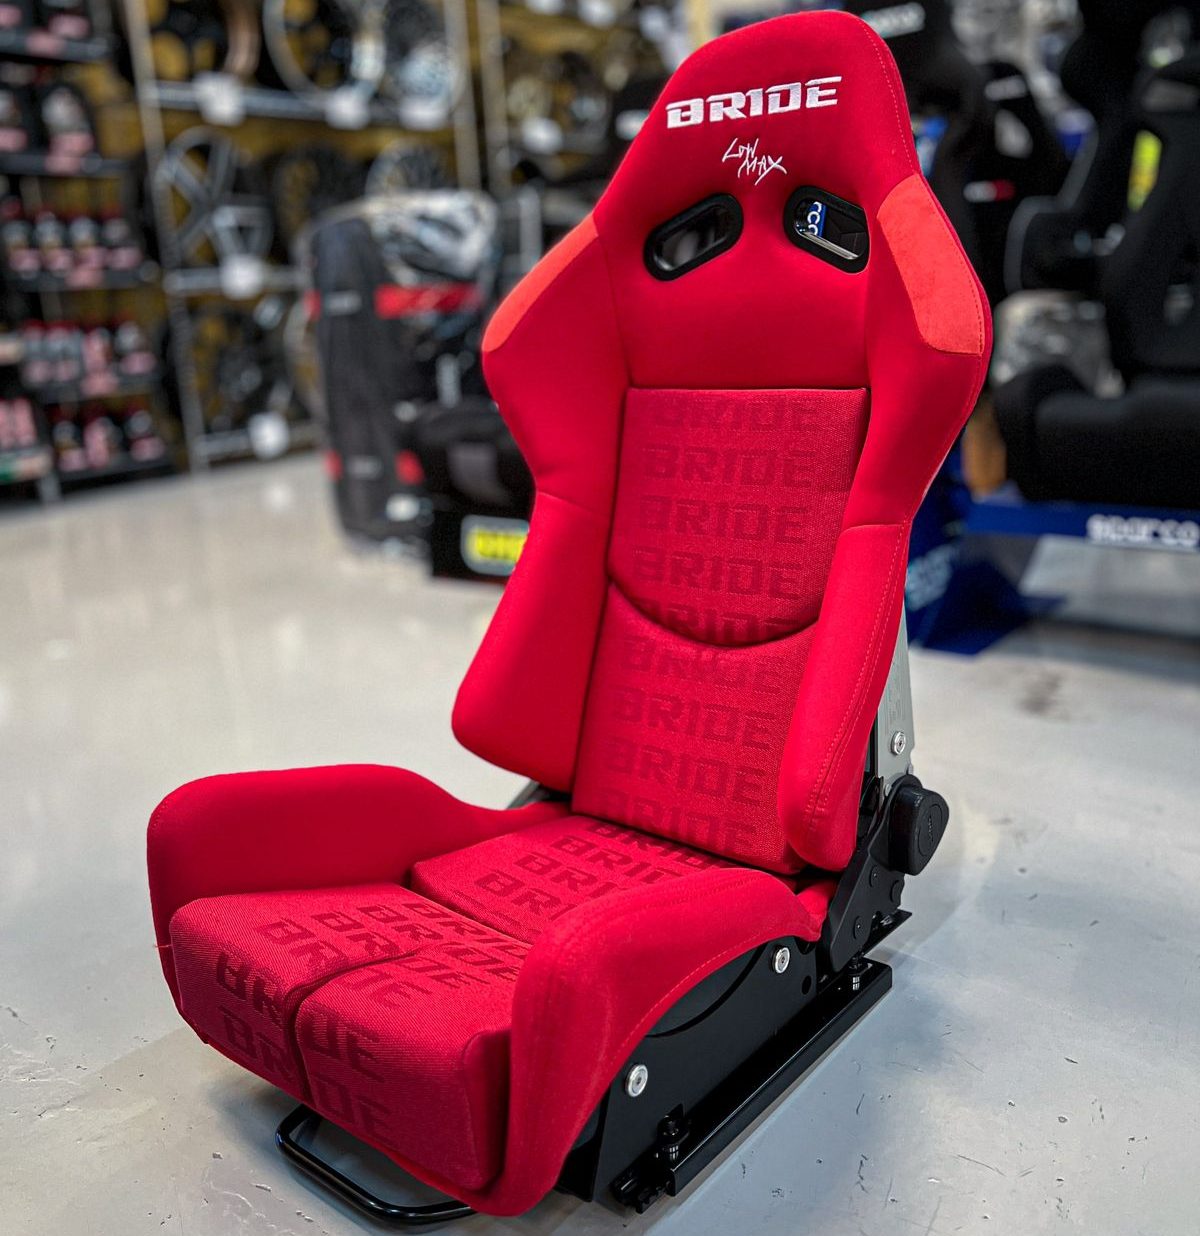 Bride Stradia Low Max Style Reclinable Racing Seat